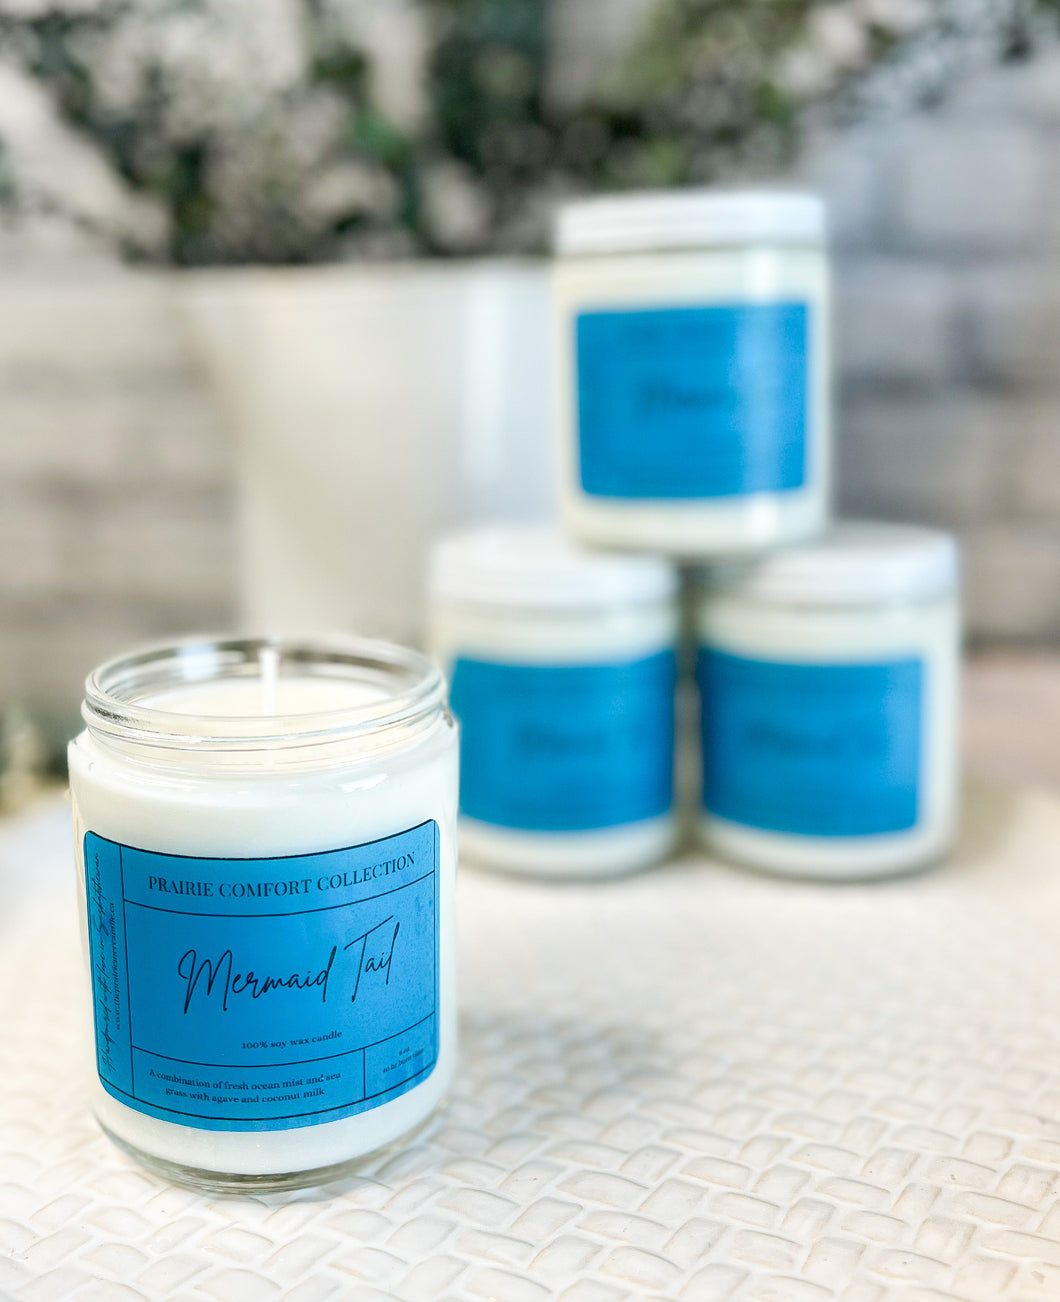 Mermaid Tail 8oz Soy Wax Candle